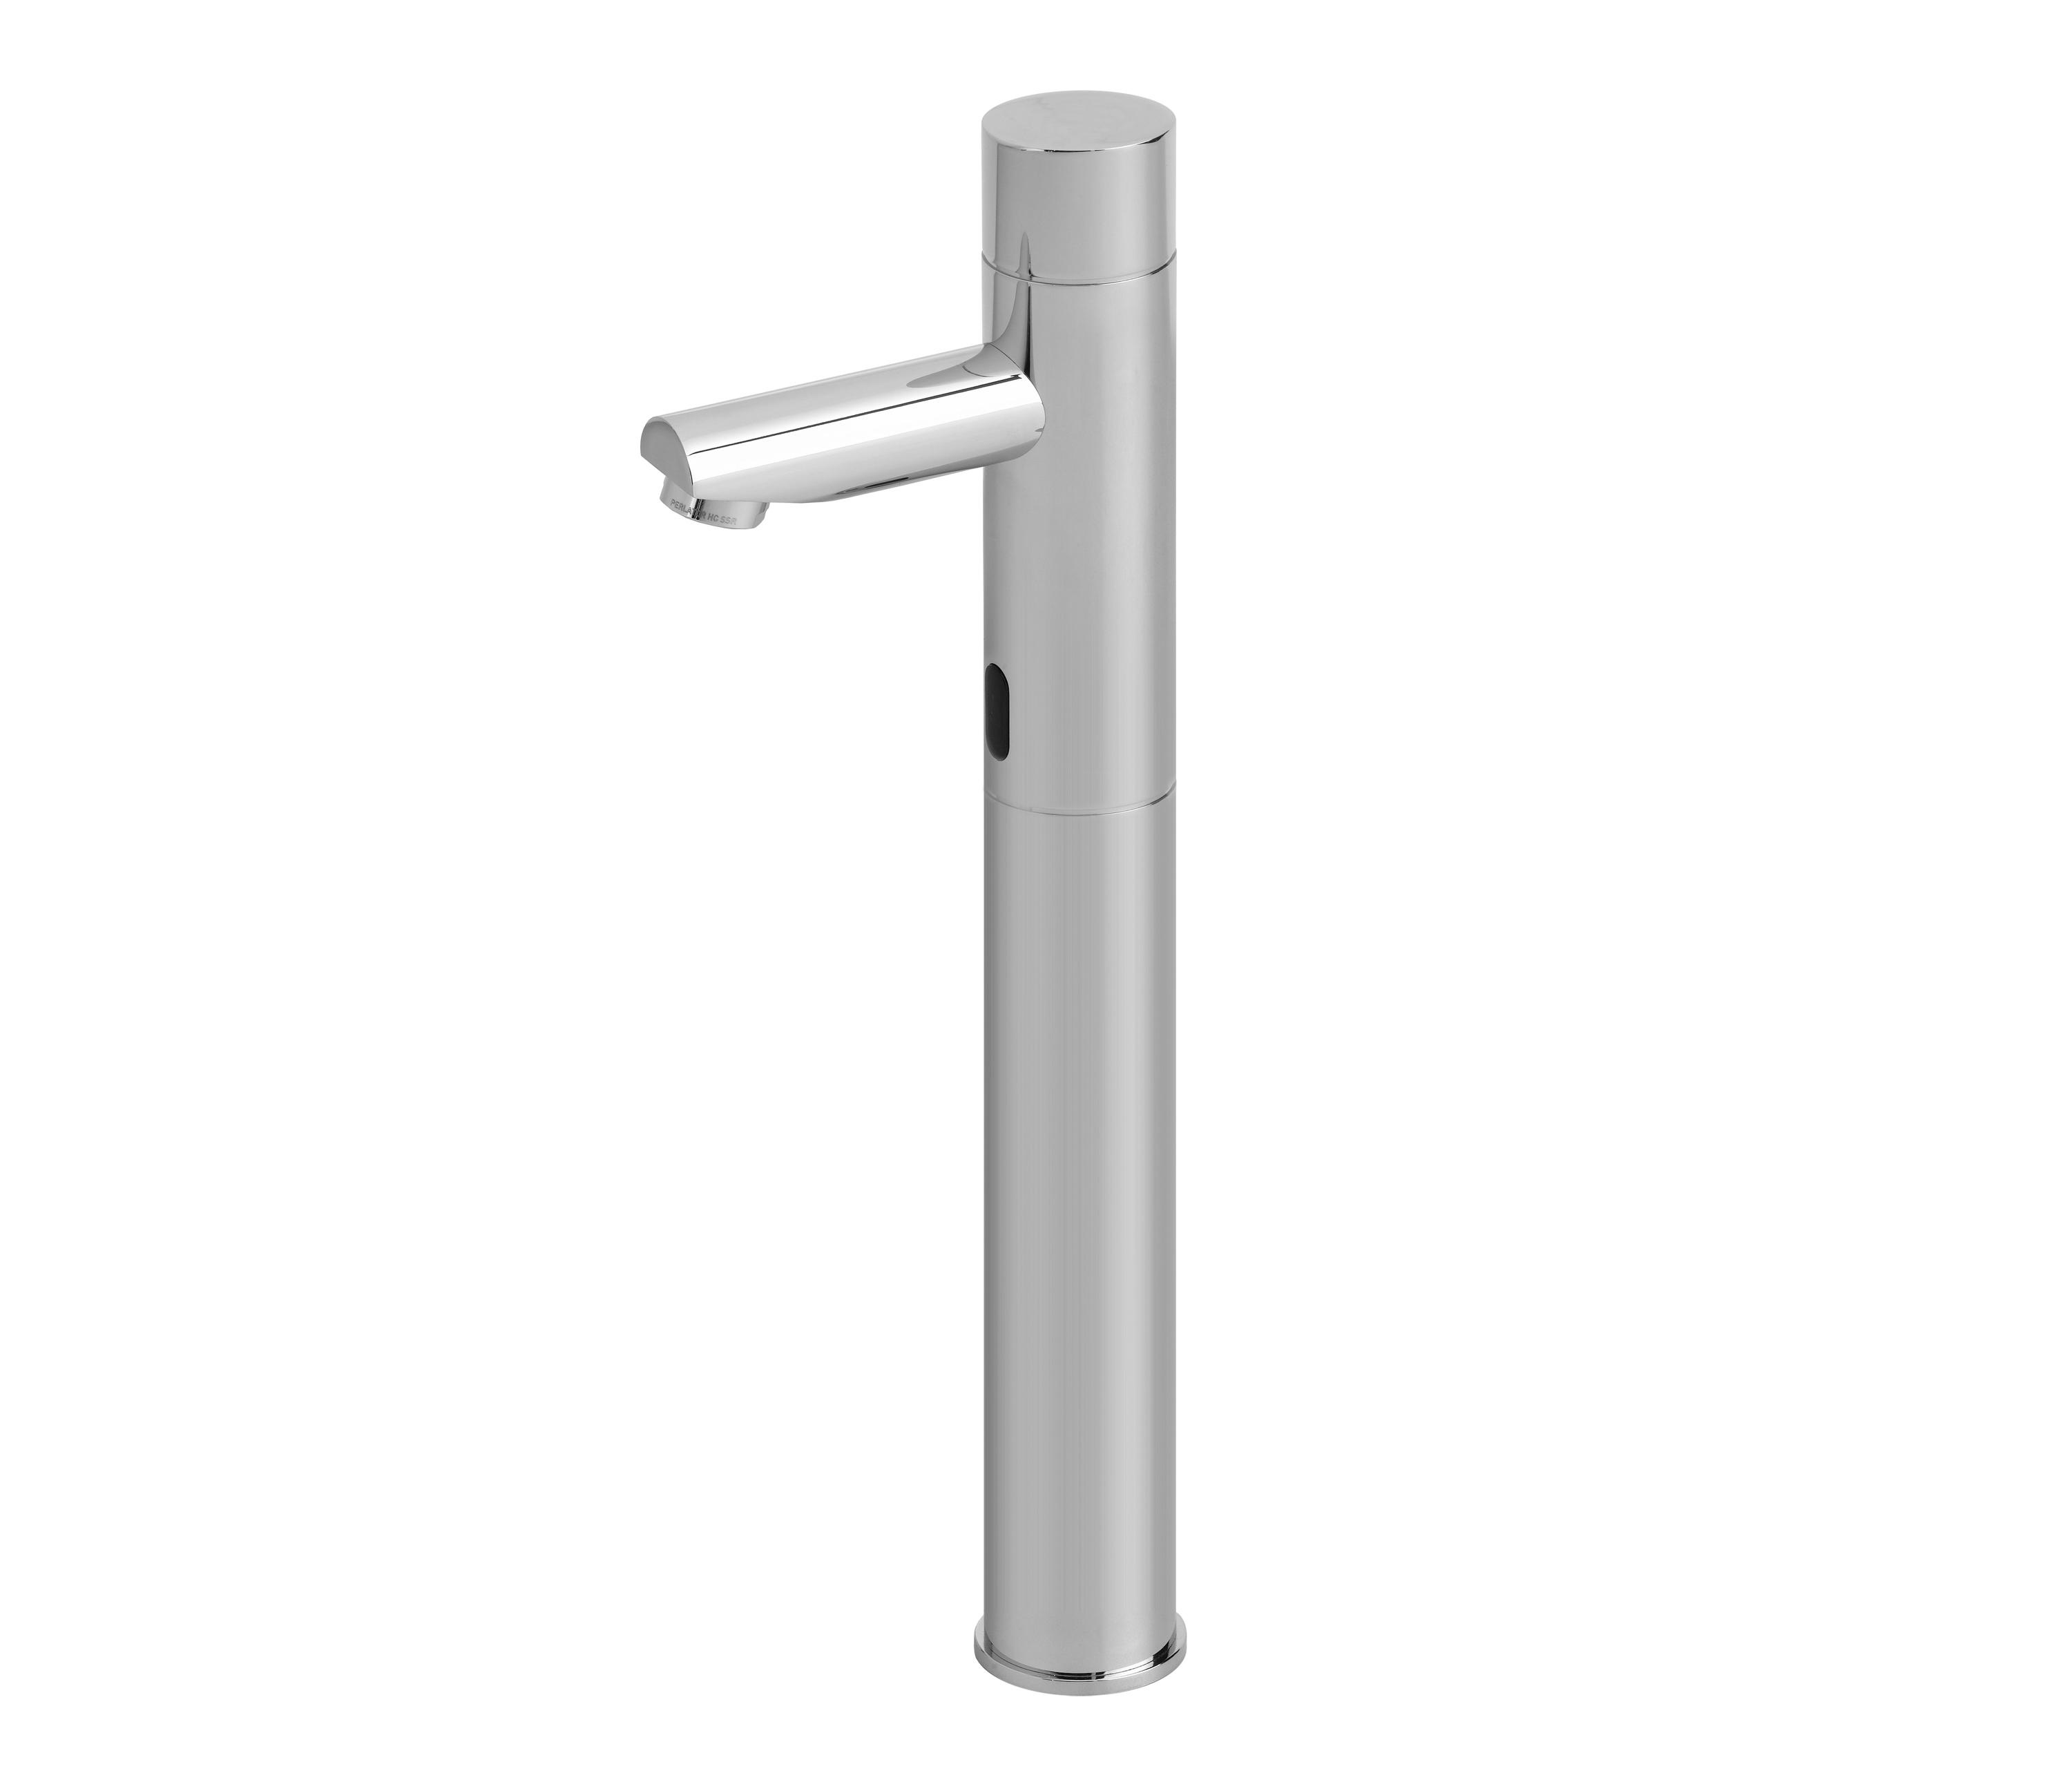 TRENDY PLUS E - Wash basin taps from Stern Engineering